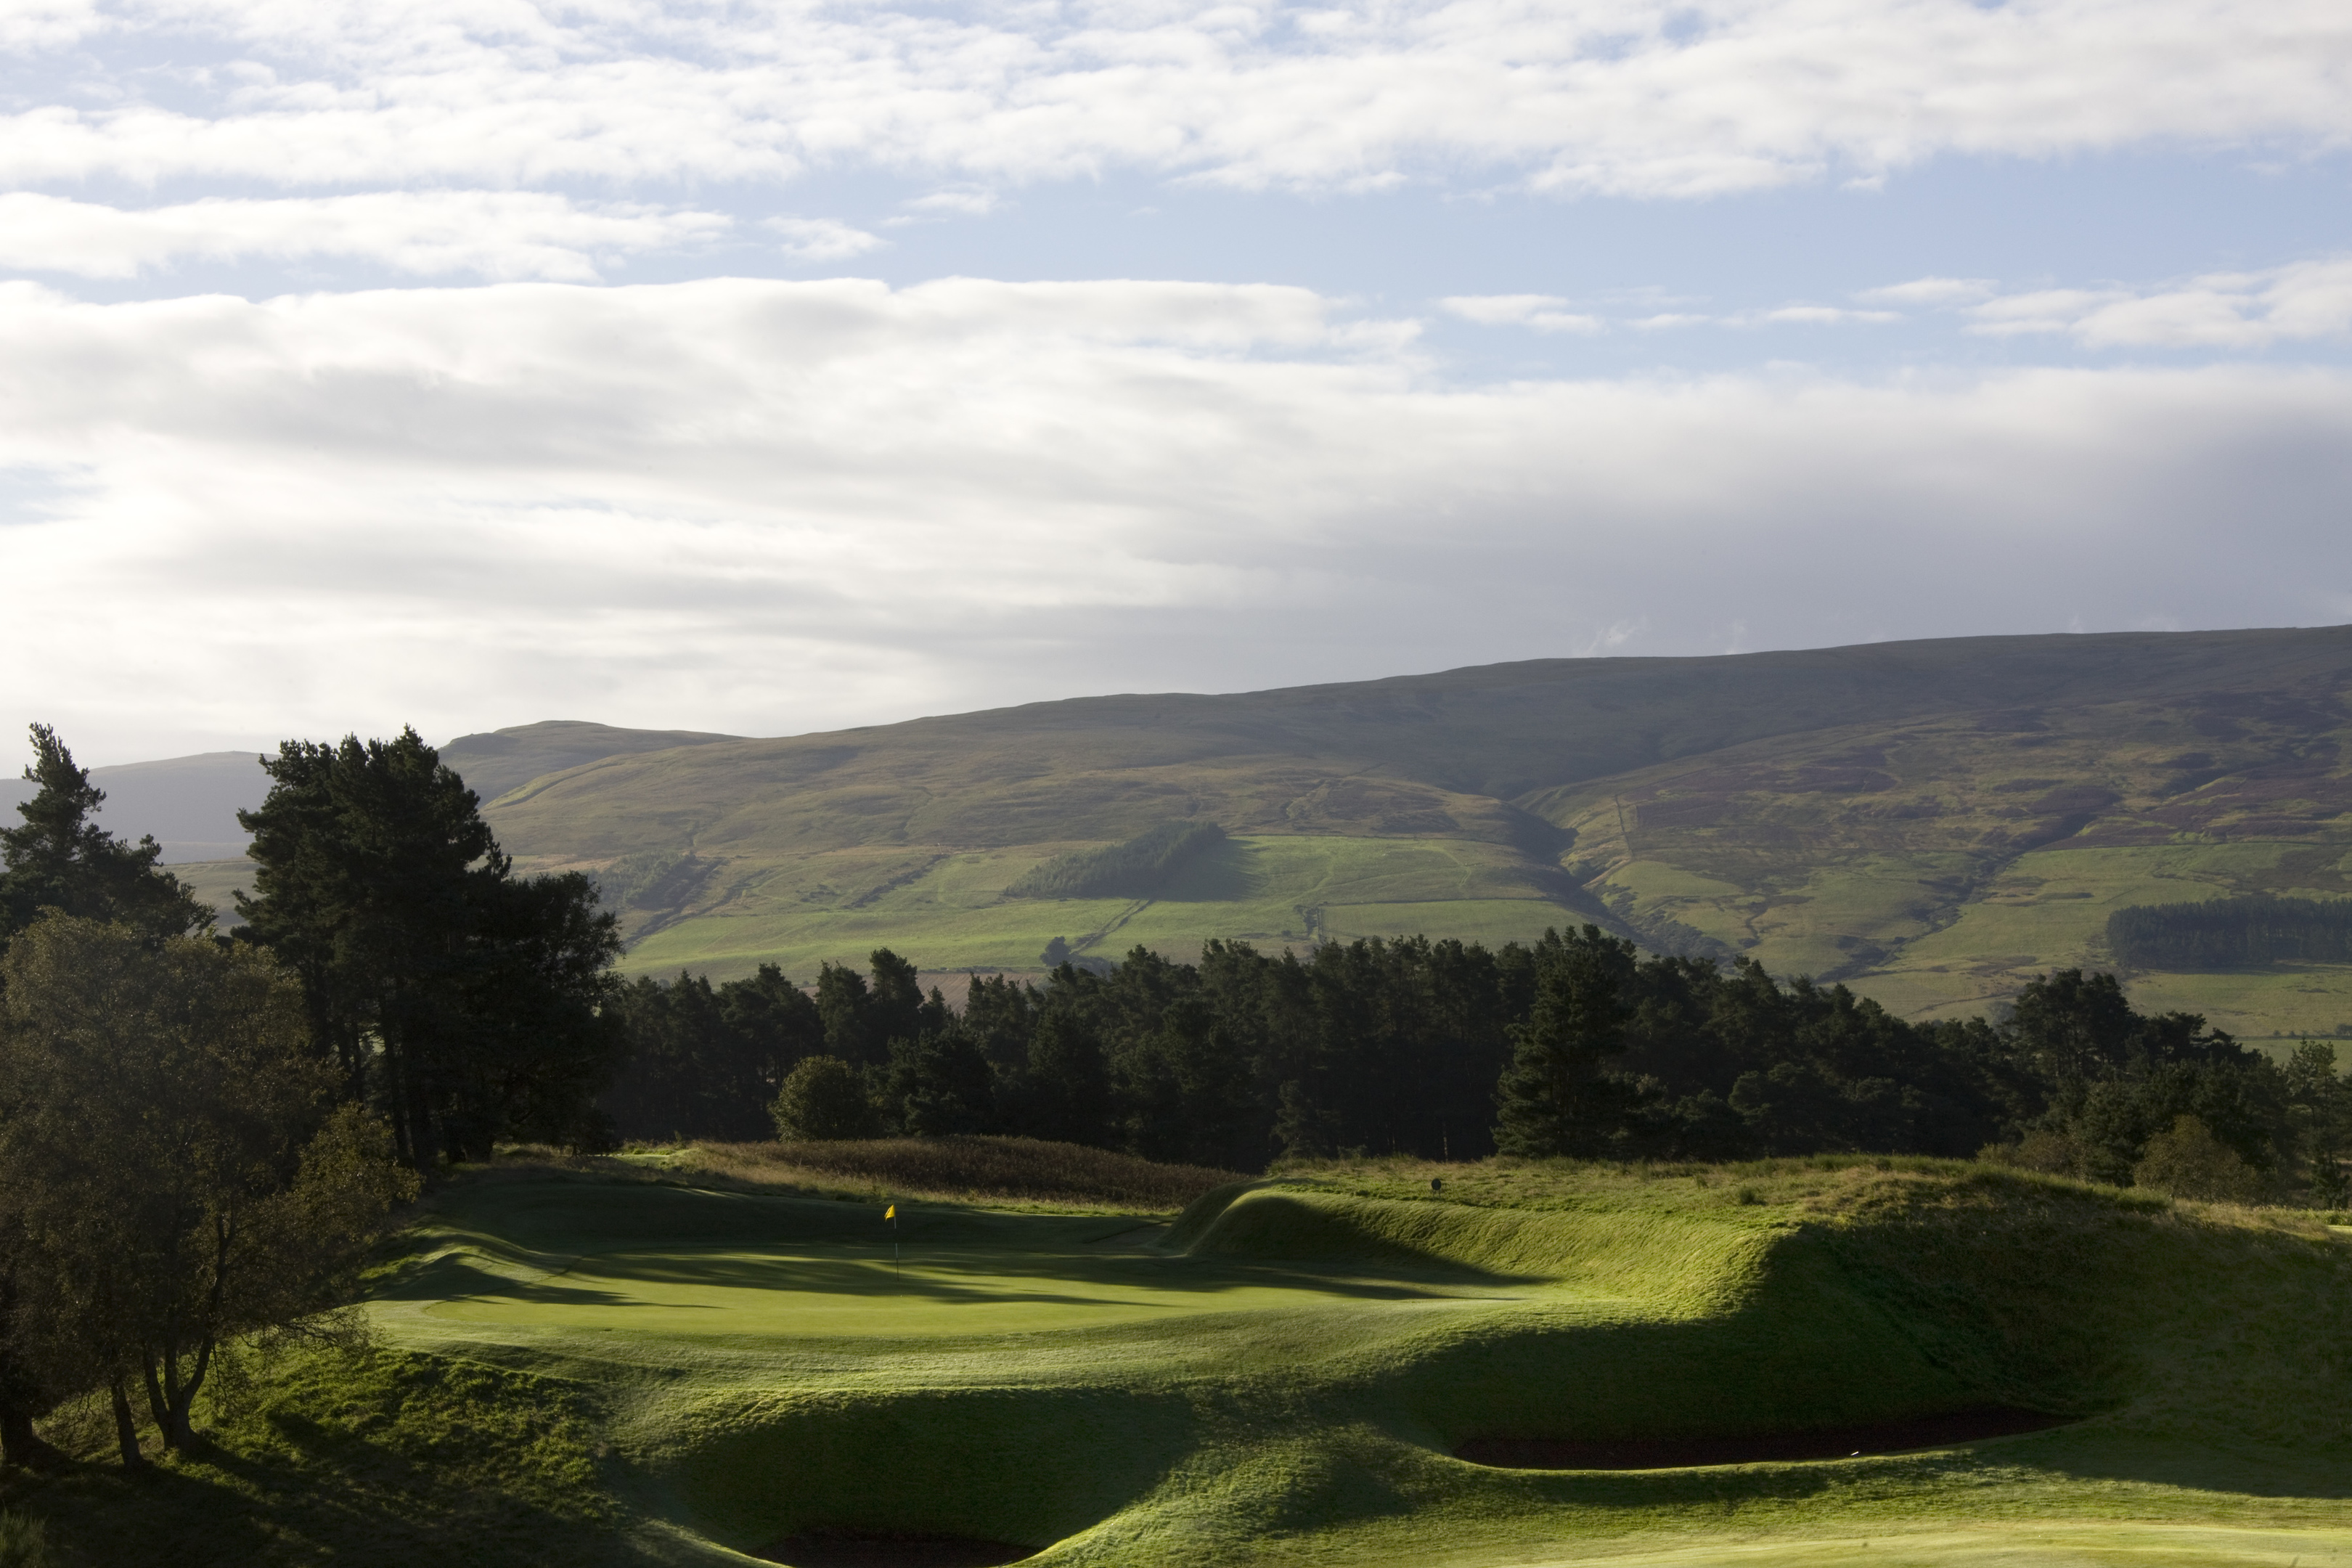 The King's Course at Gleneagles.